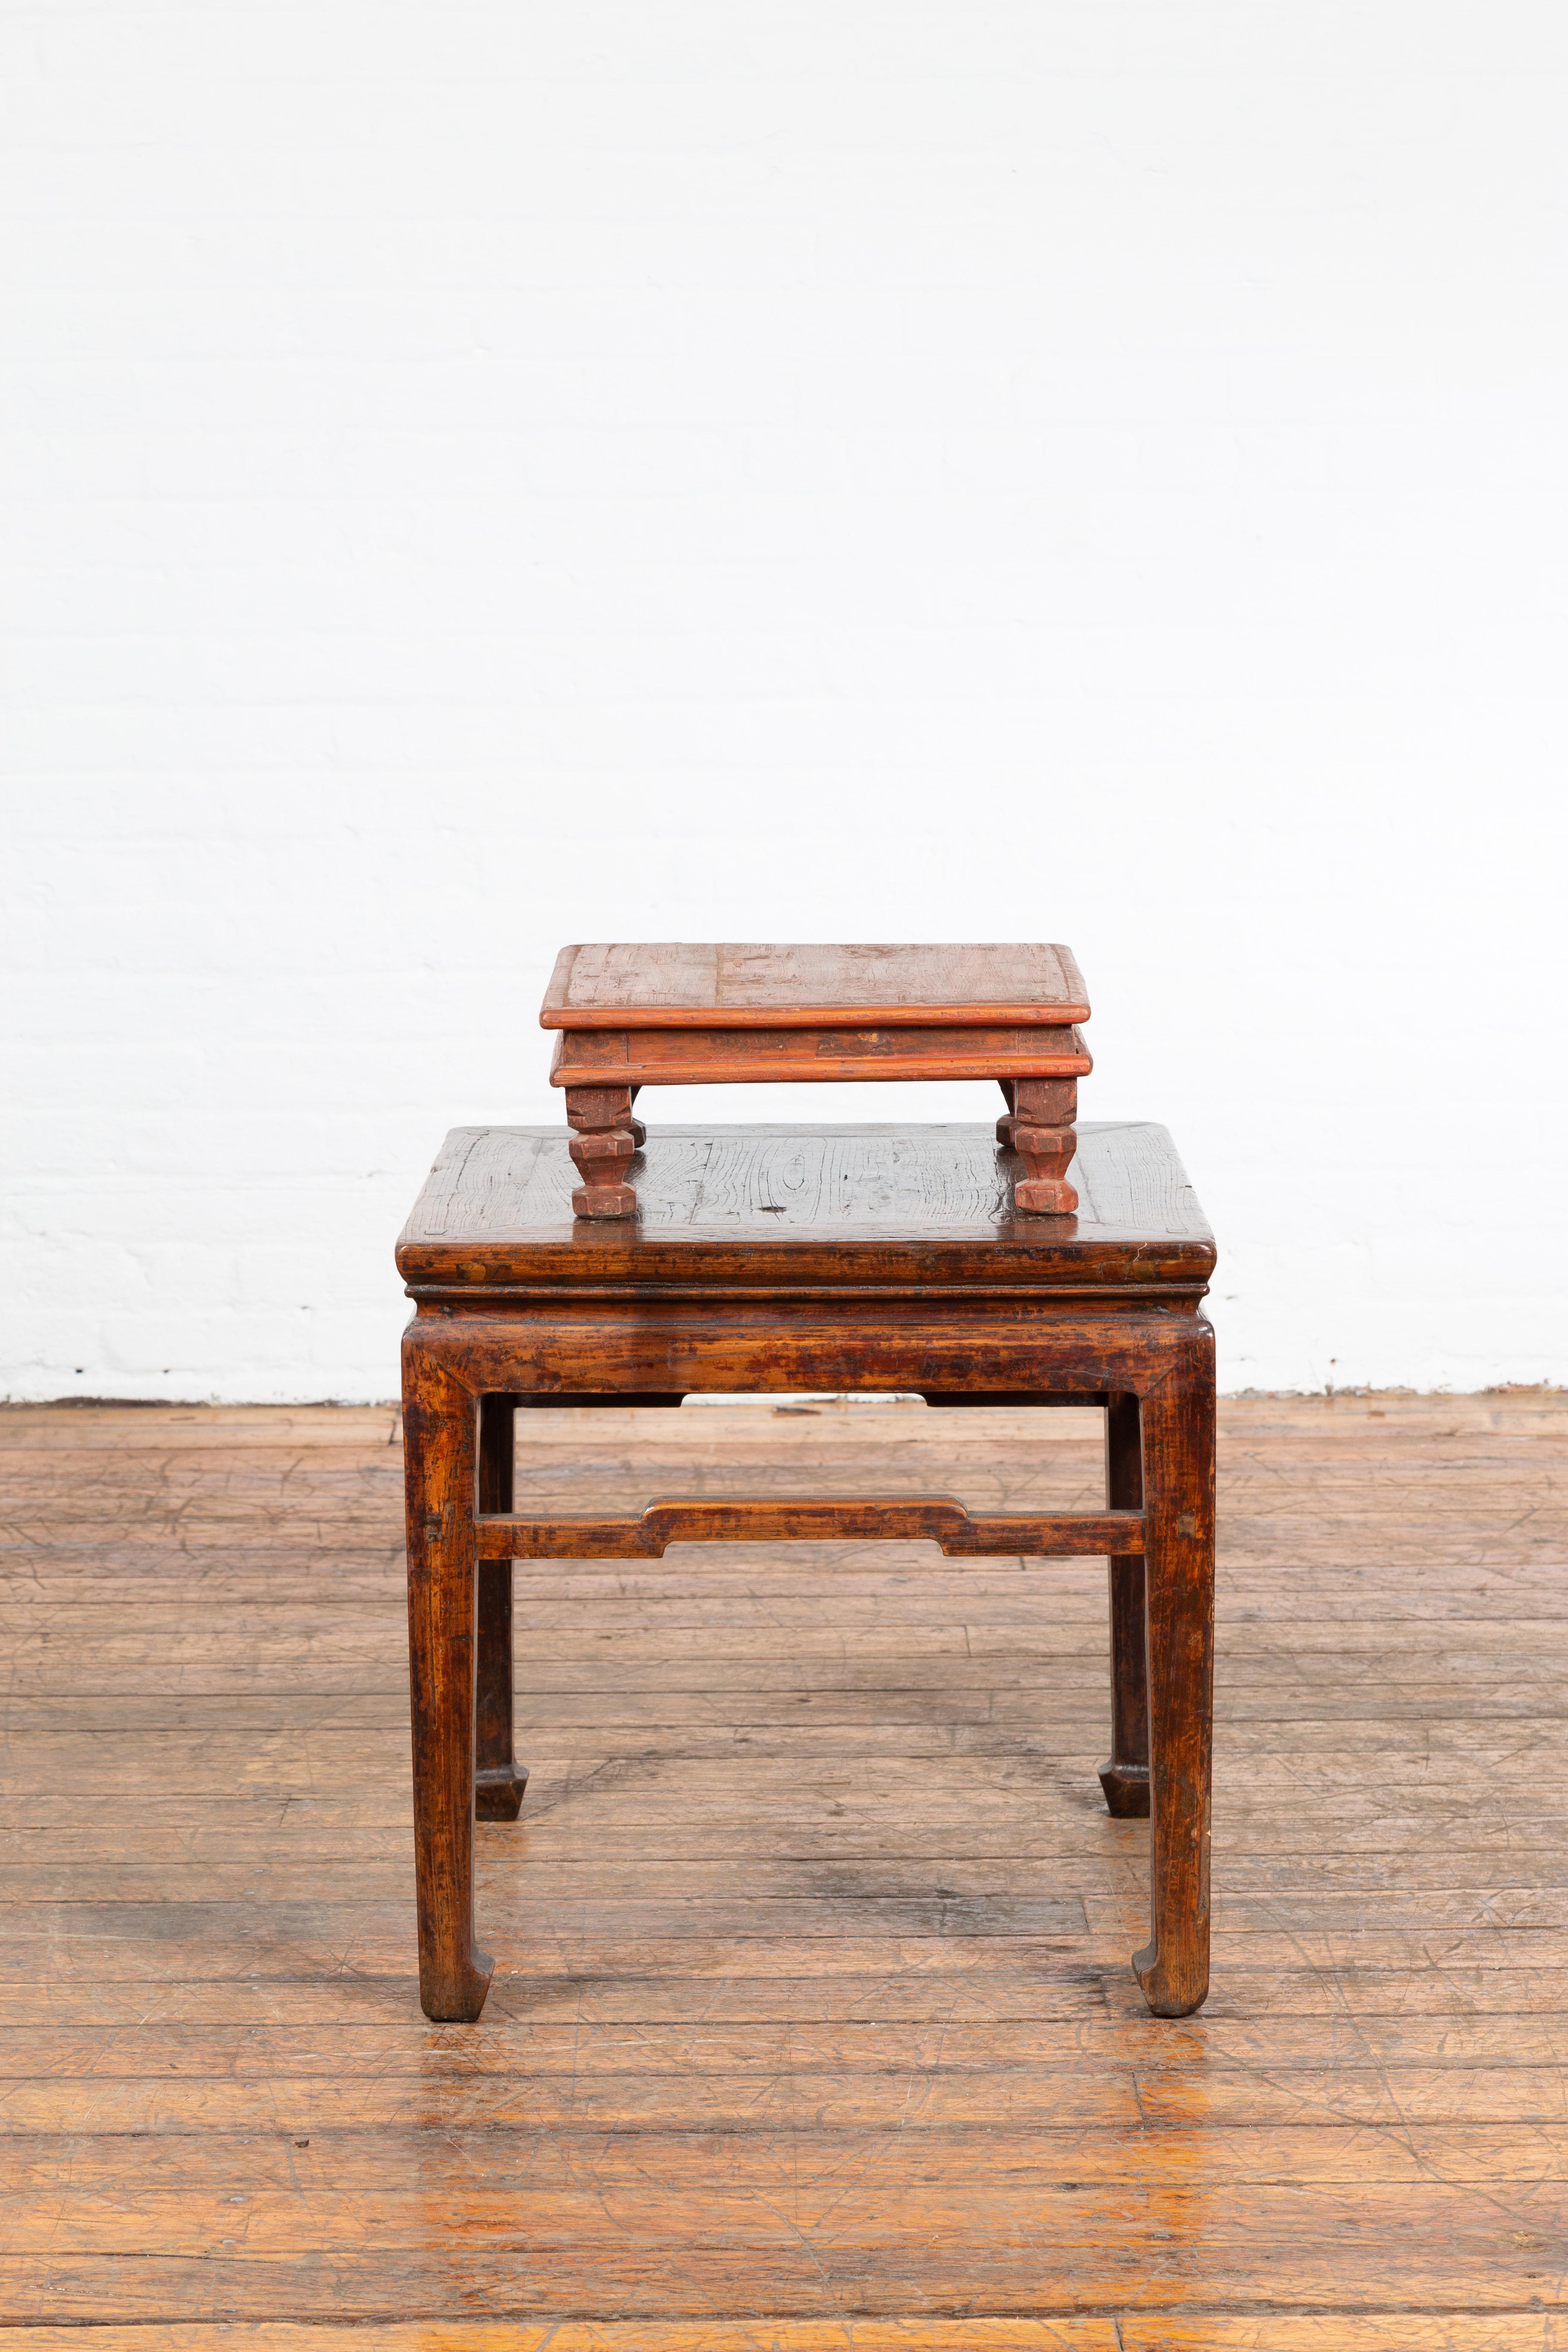 Vintage Indian Low Wooden Prayer Table Stand with Carved Angular Legs In Good Condition For Sale In Yonkers, NY